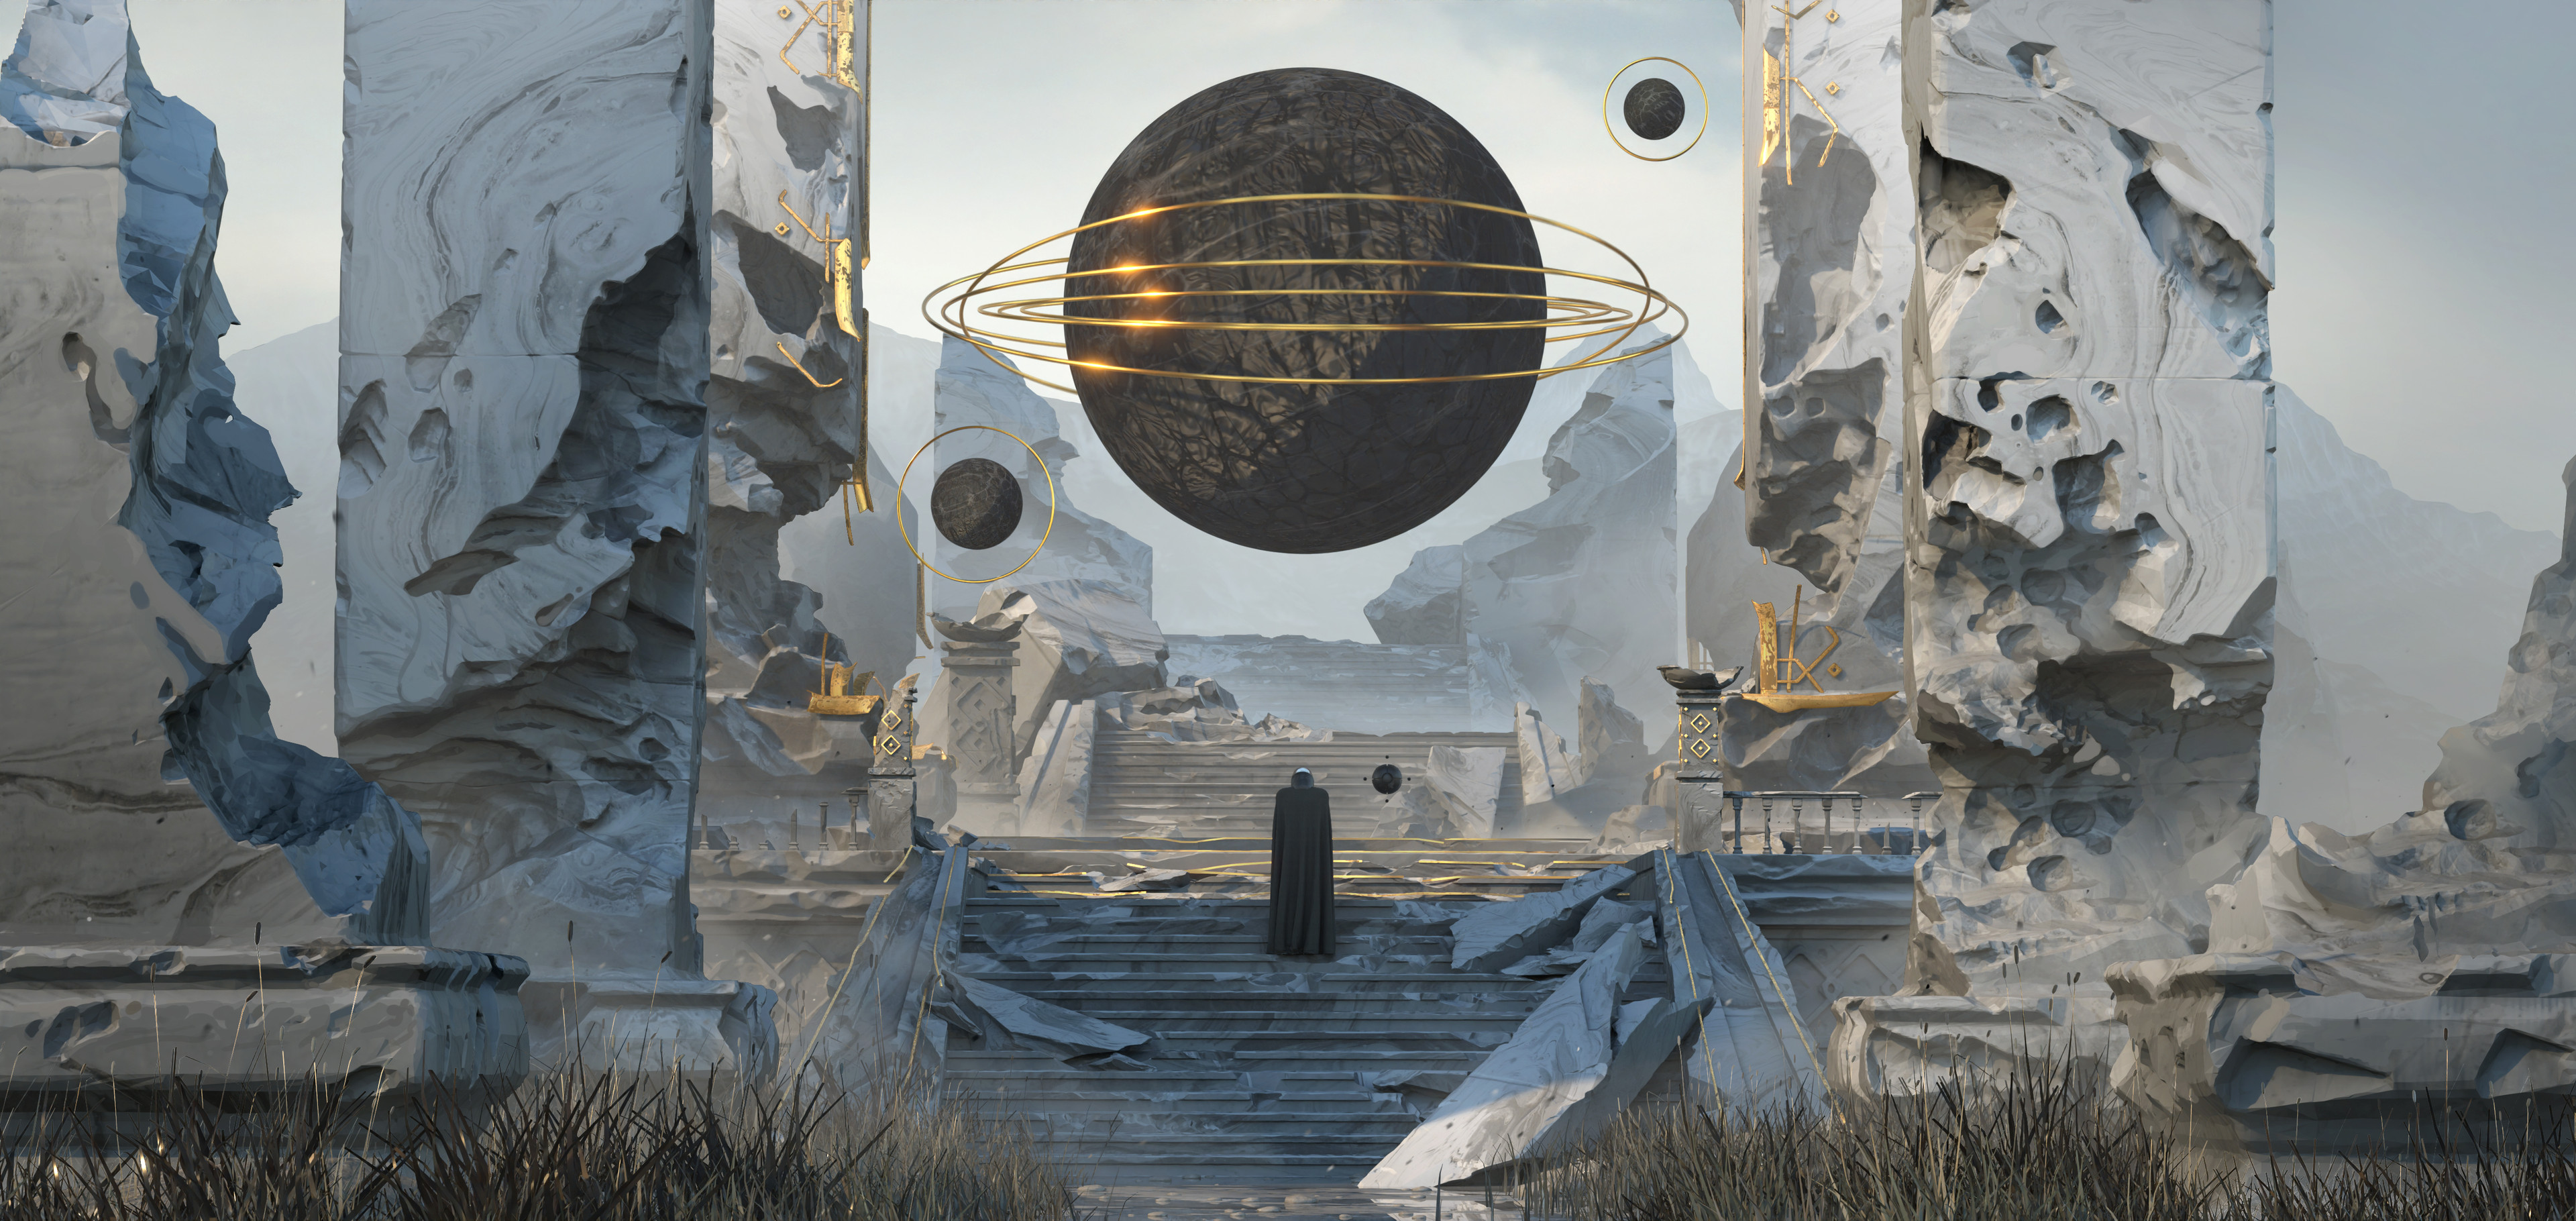 General 3840x1820 Andis Reinbergs digital art artwork illustration futuristic sphere structure stairs science fiction ruins